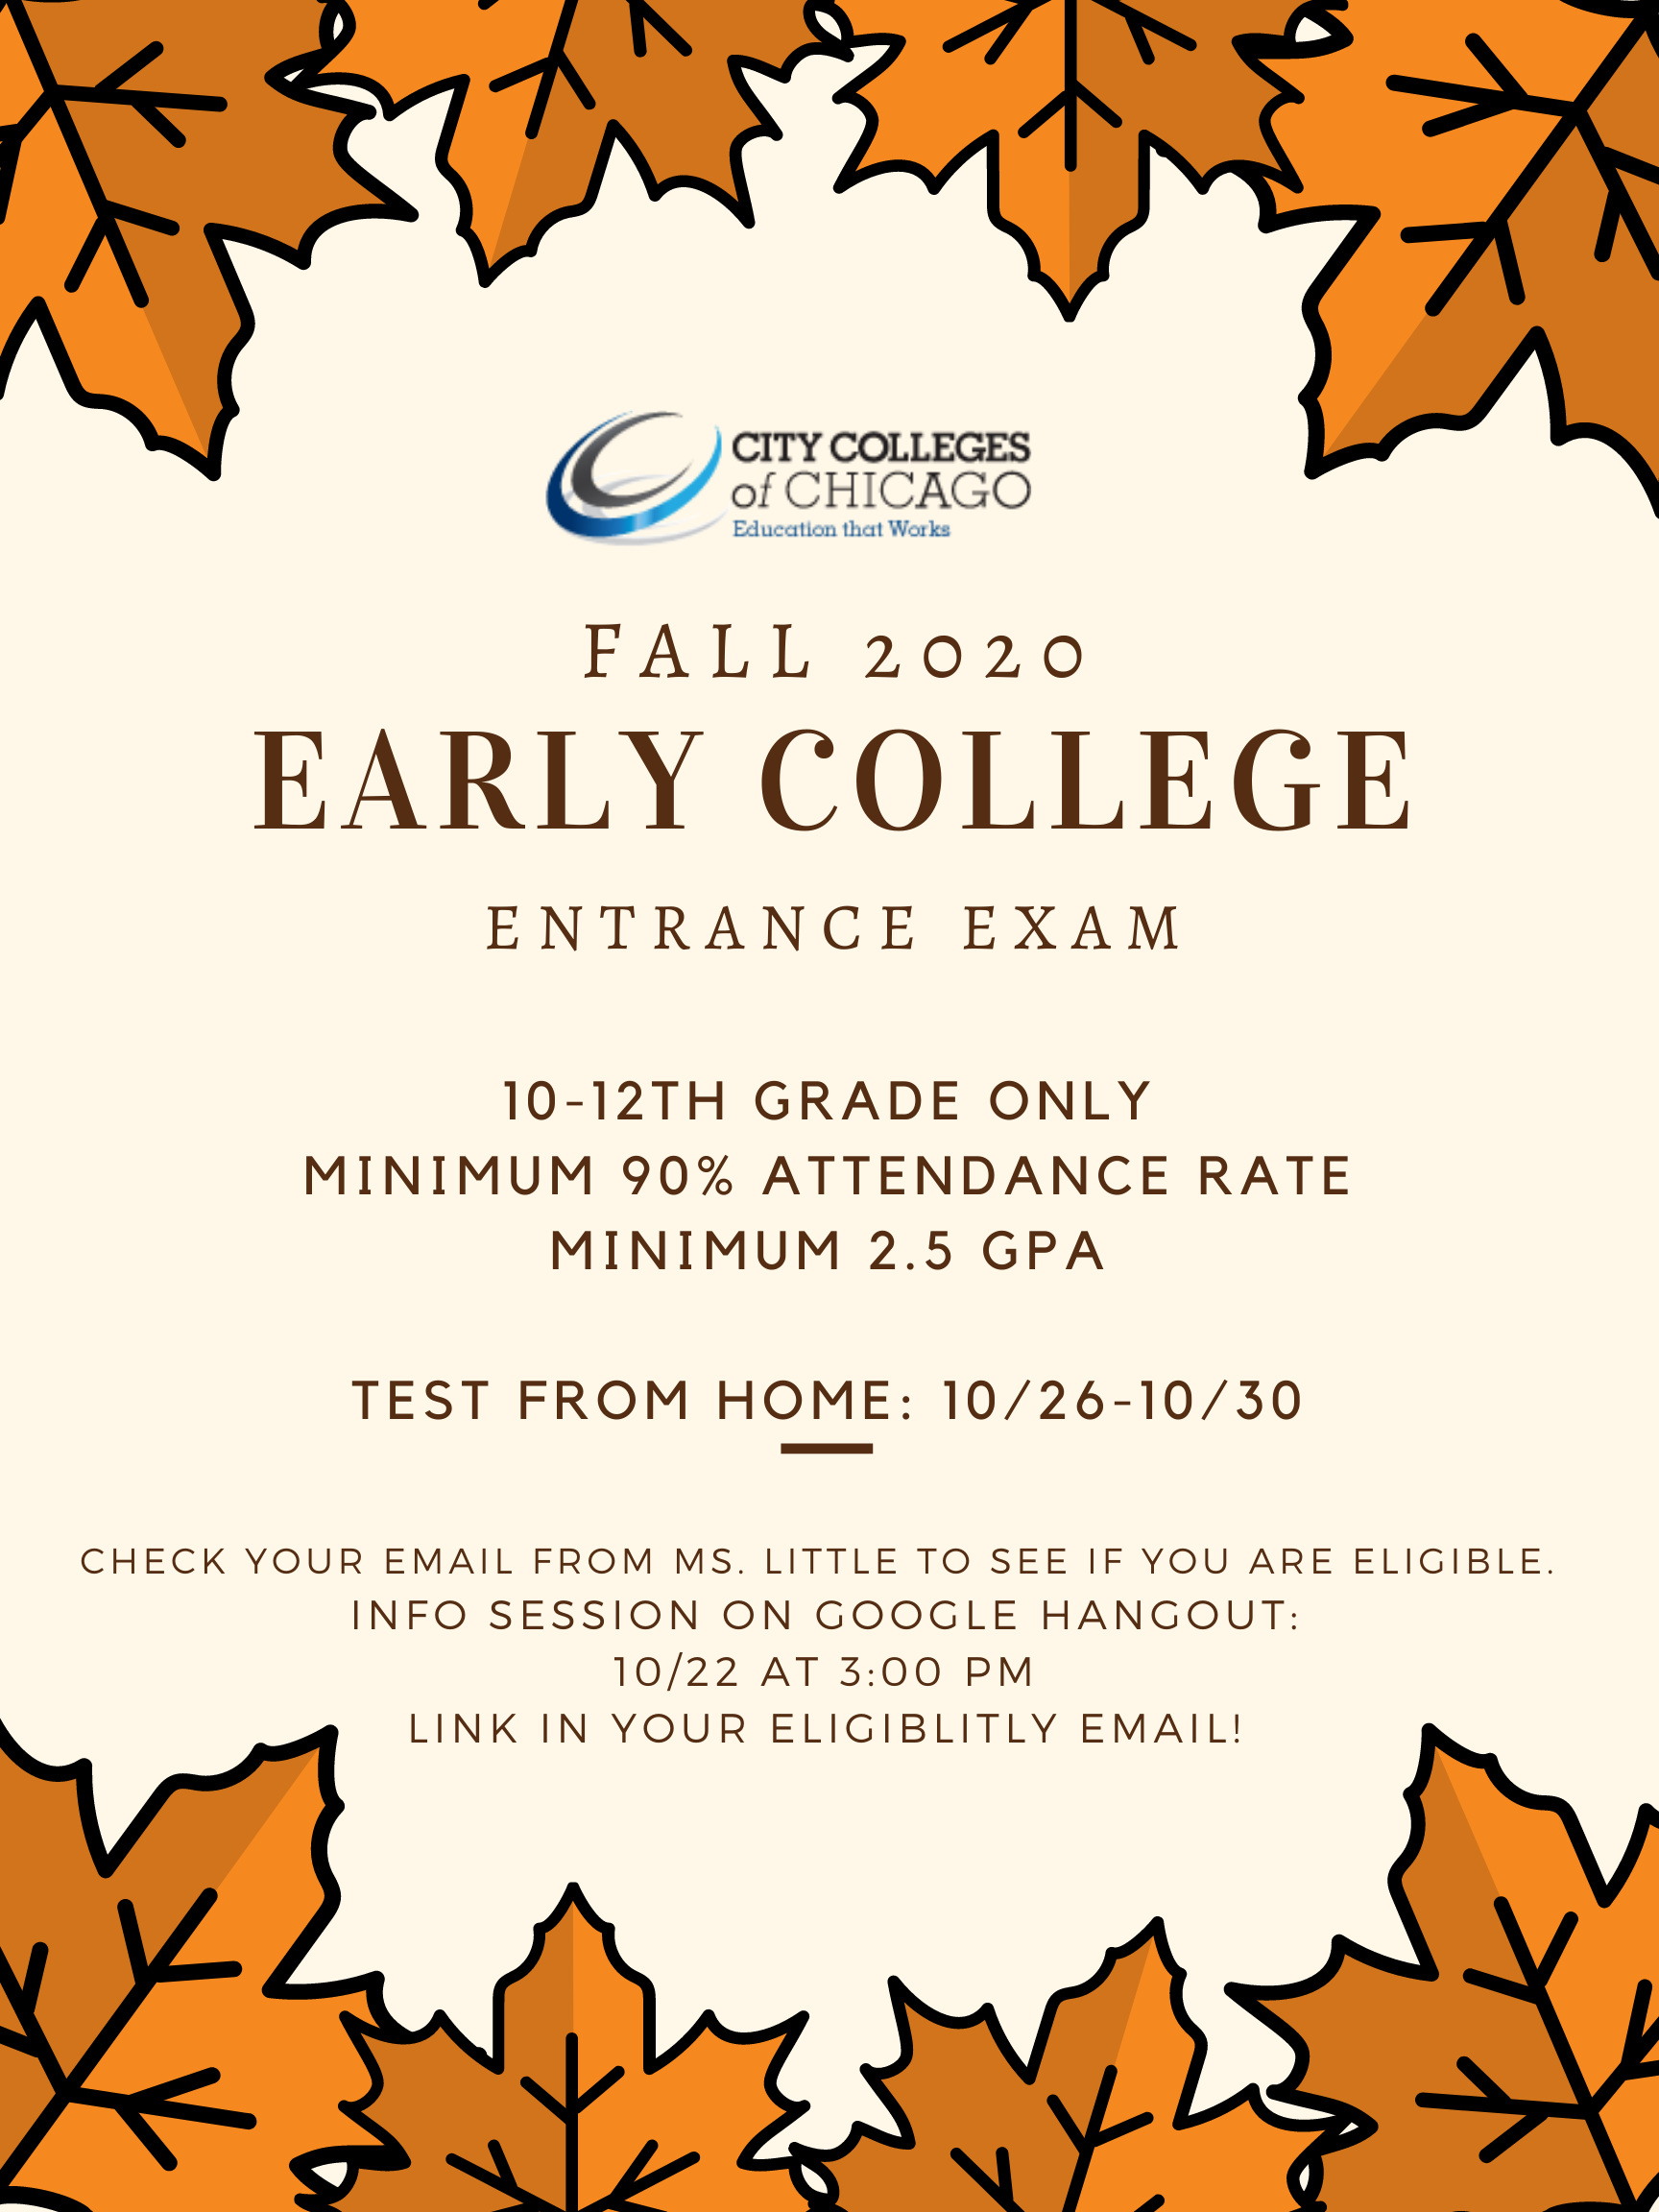 Early College Entrance Exam